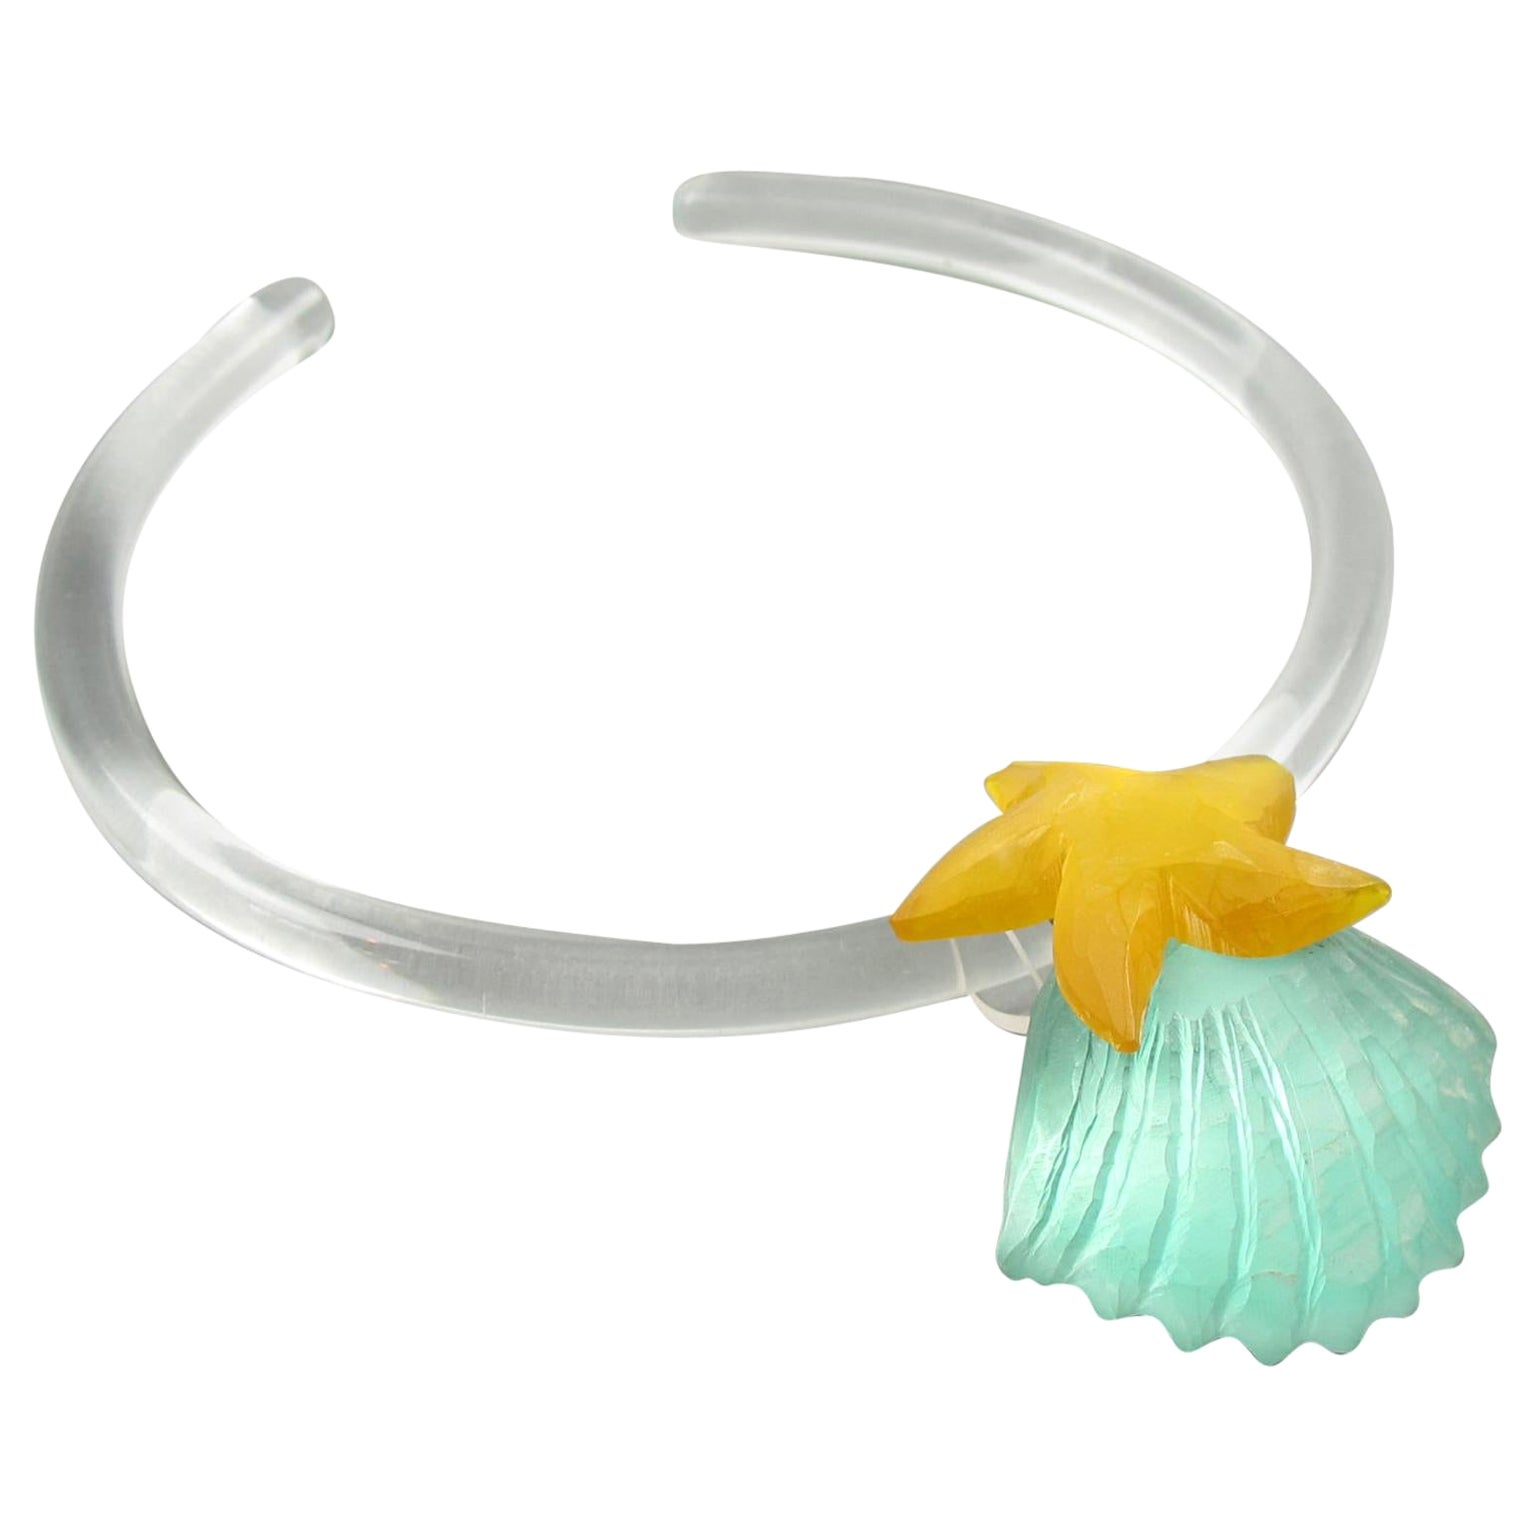 Kaso Rigid Lucite Choker Necklace Green Yellow Shell and Starfish For Sale